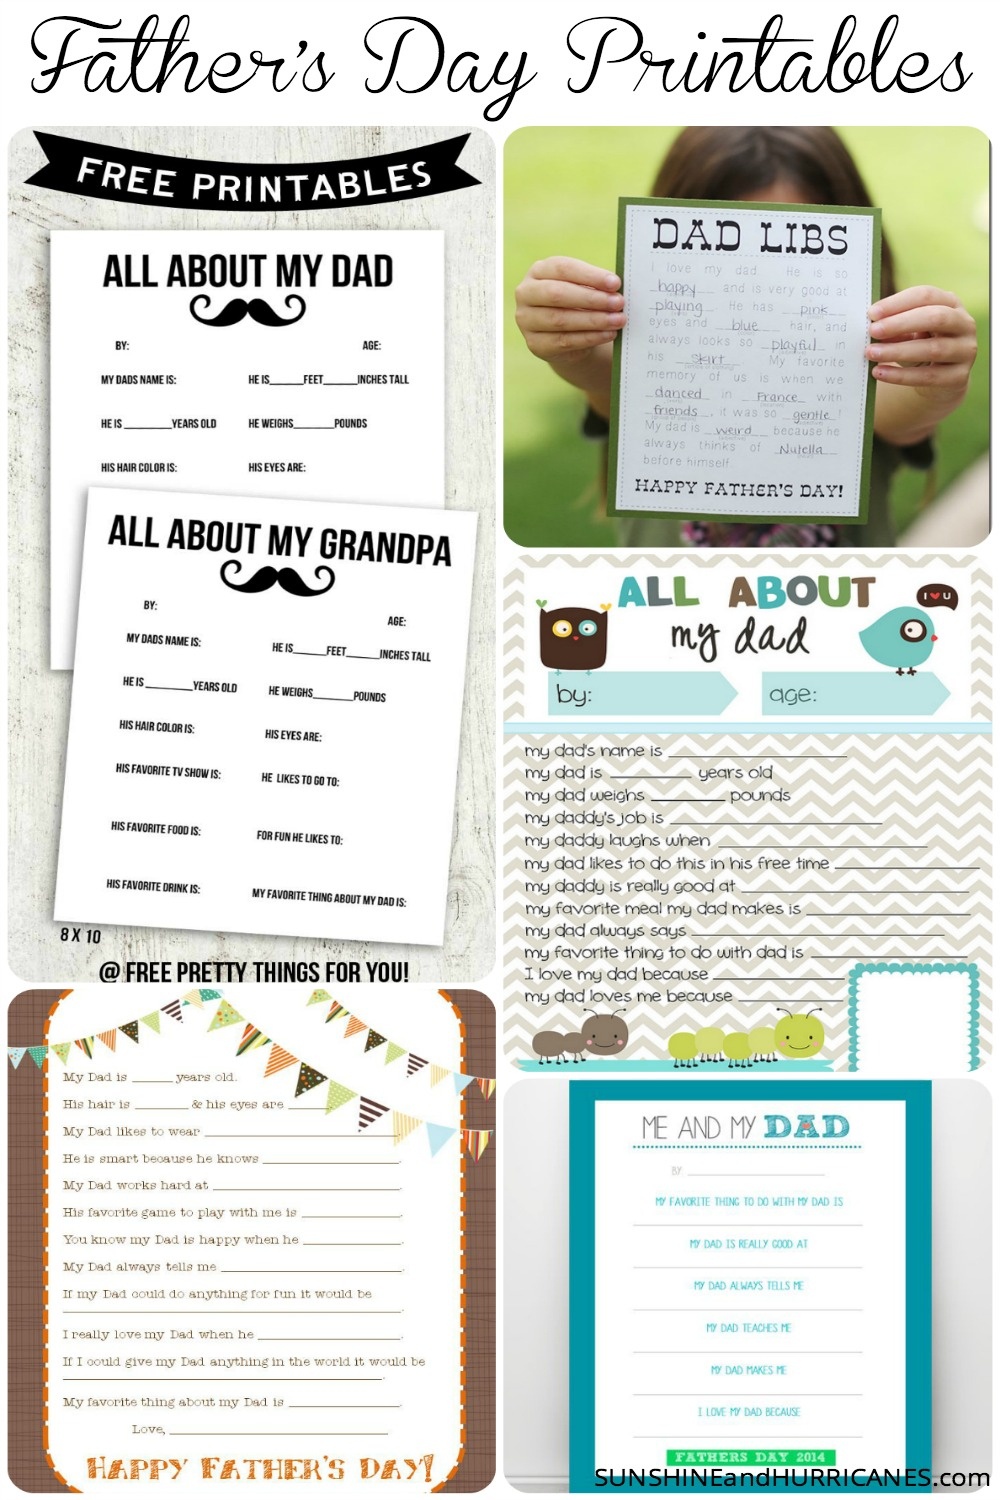 All About My Dad A Printable Father #39 s Day Questionnaire Free